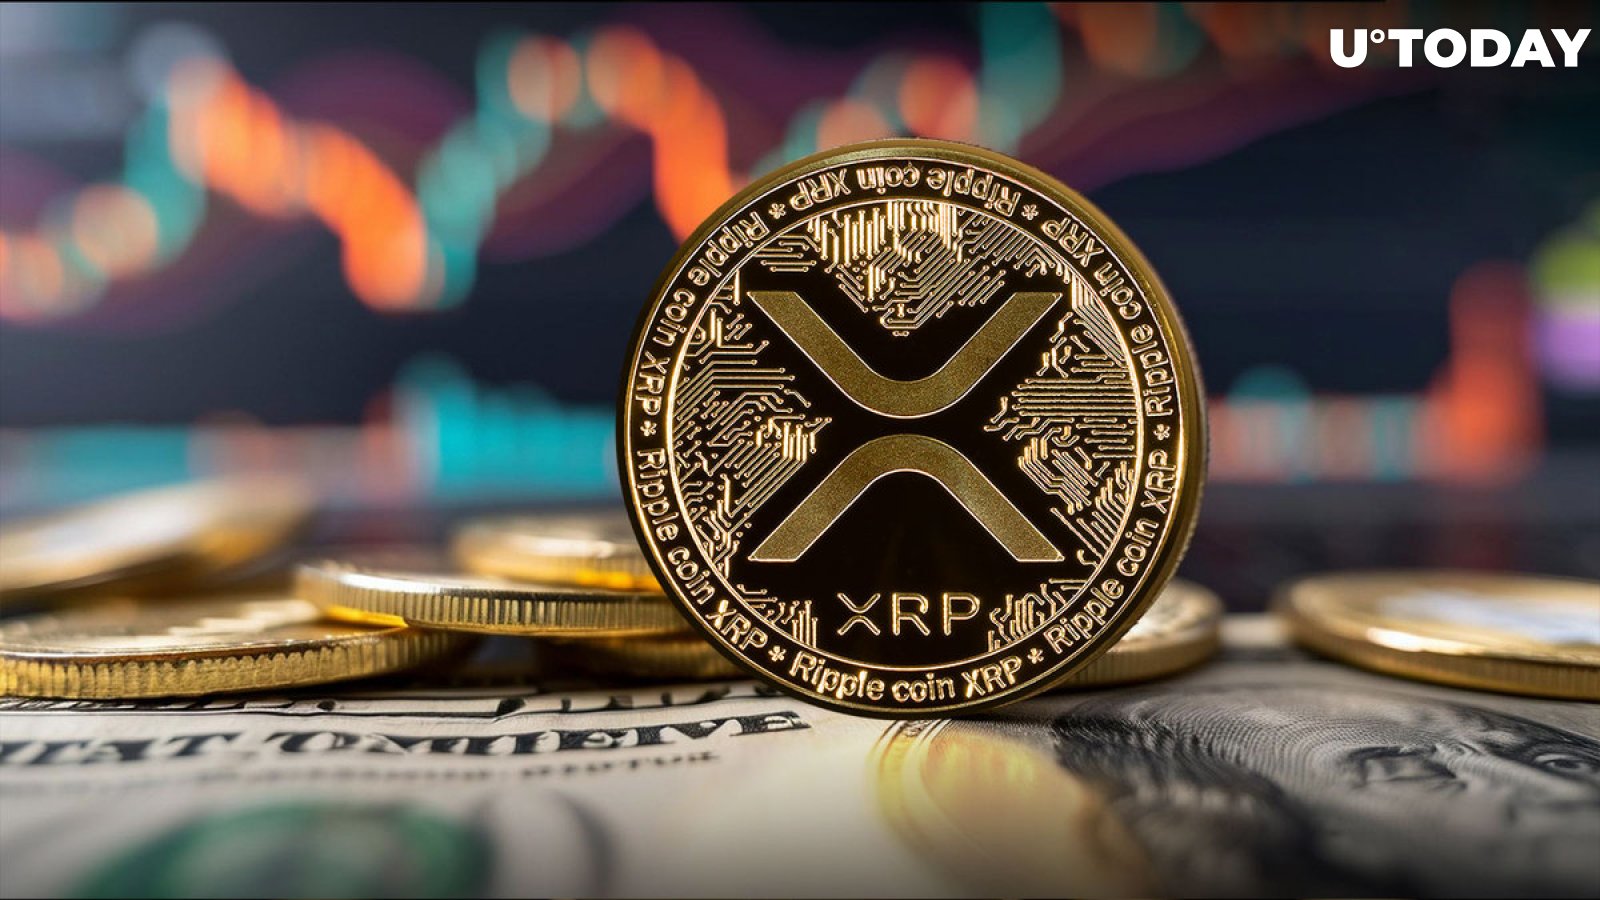 Just In: XRP Breaks $0.6 Resistance, Moves Up